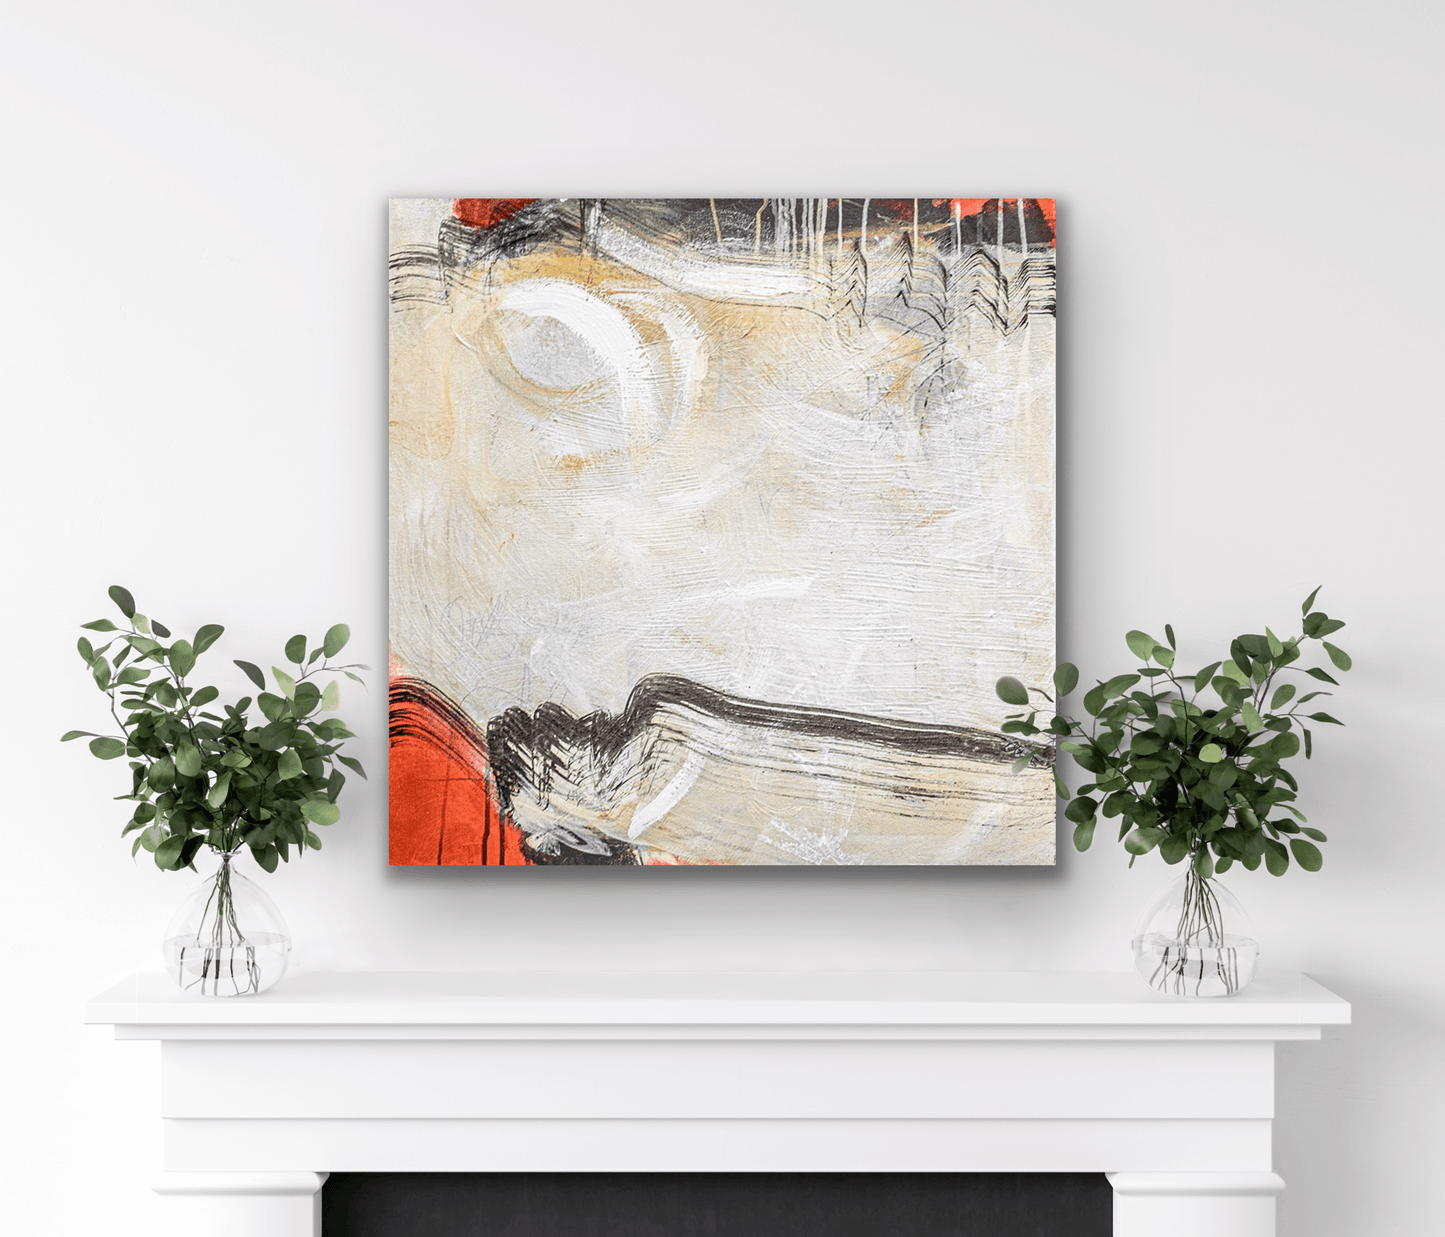 "Your Intensions" original artwork will compliment many rooms of your home.